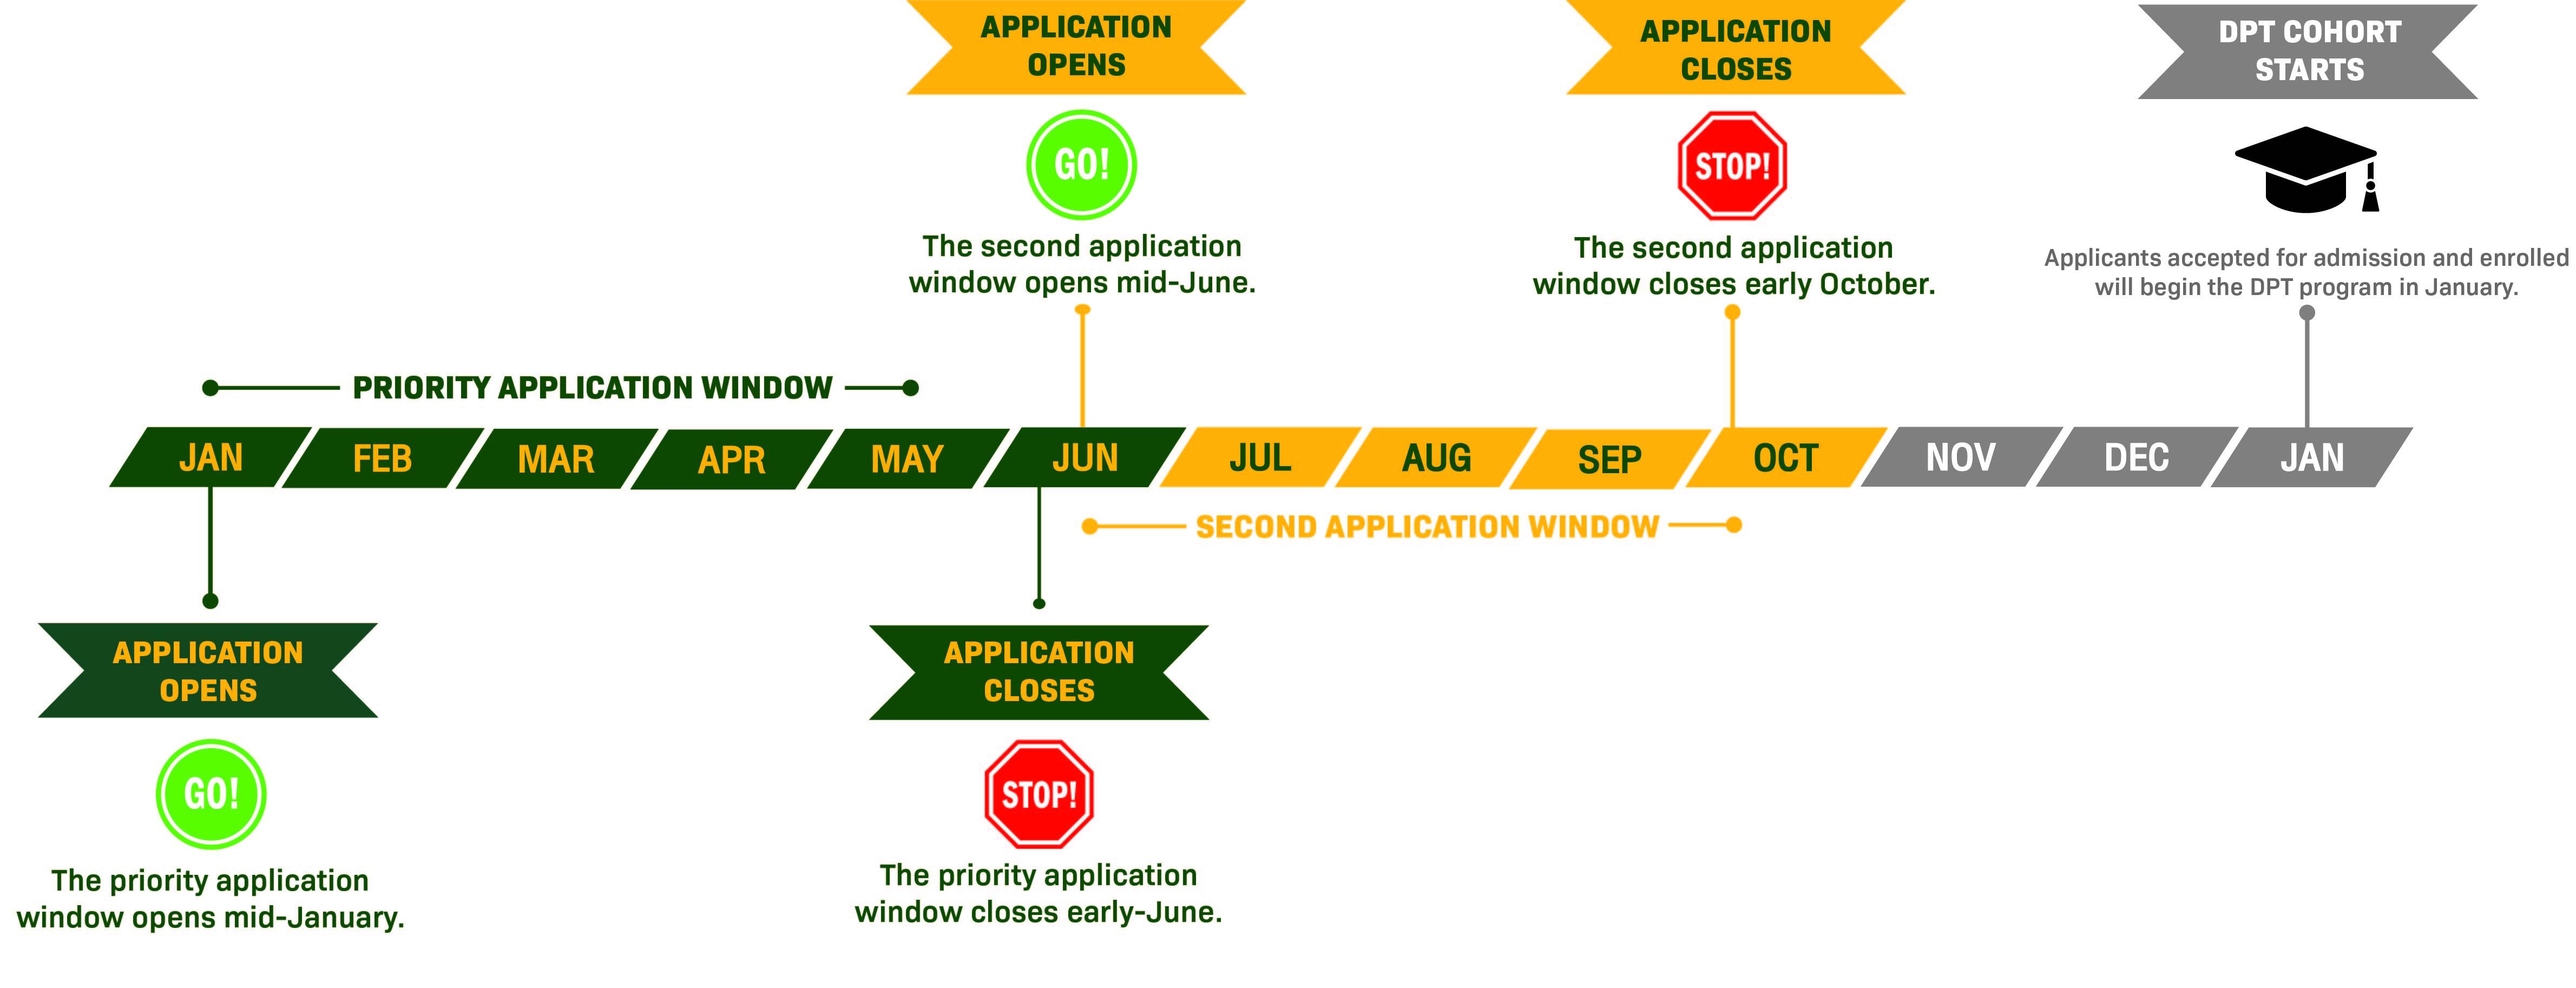 DPT Application Cycle 